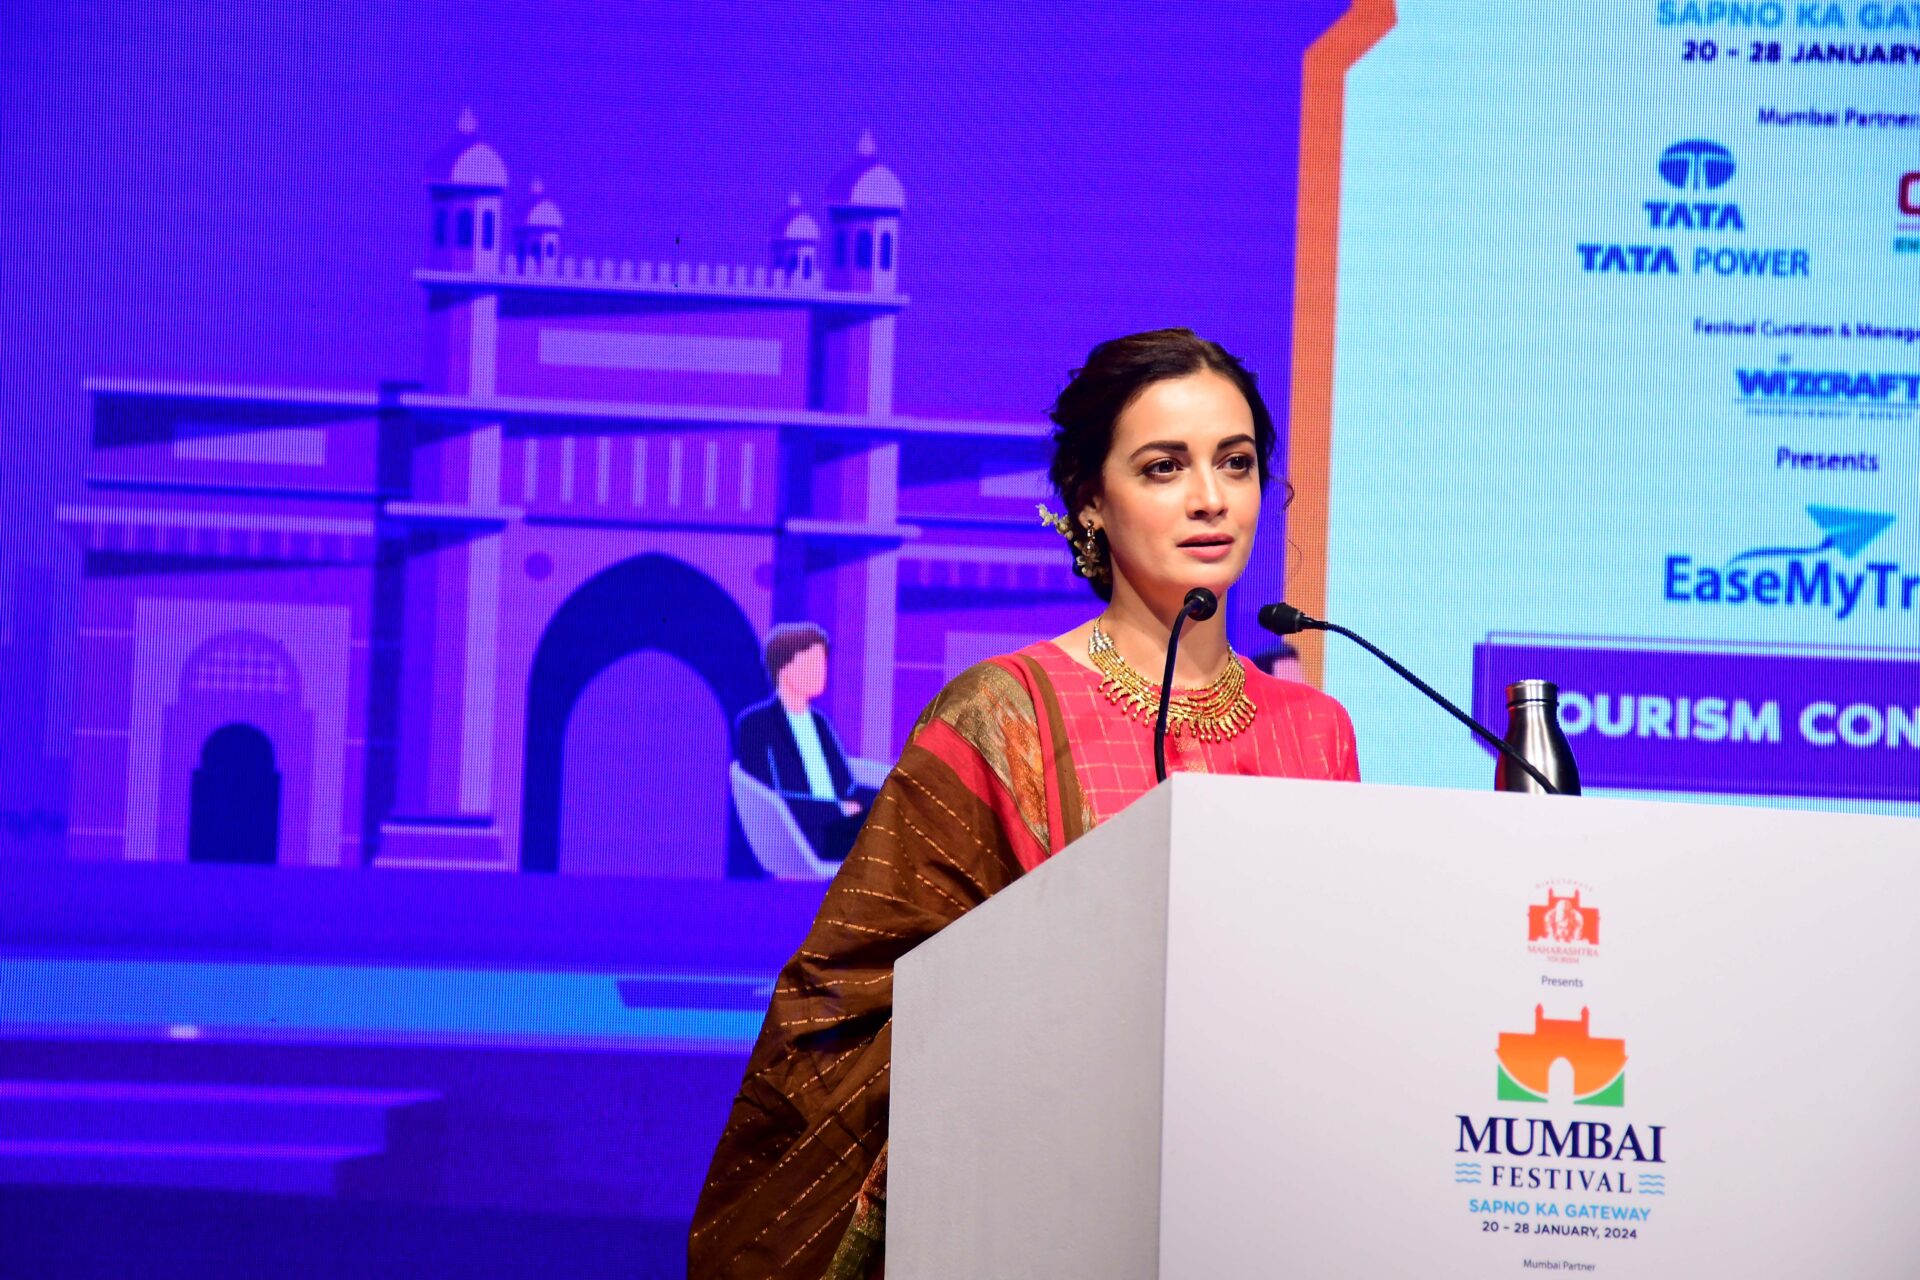 Govt keen to provide optimal facilities for tourists: Tourism Minister of Maharashtra